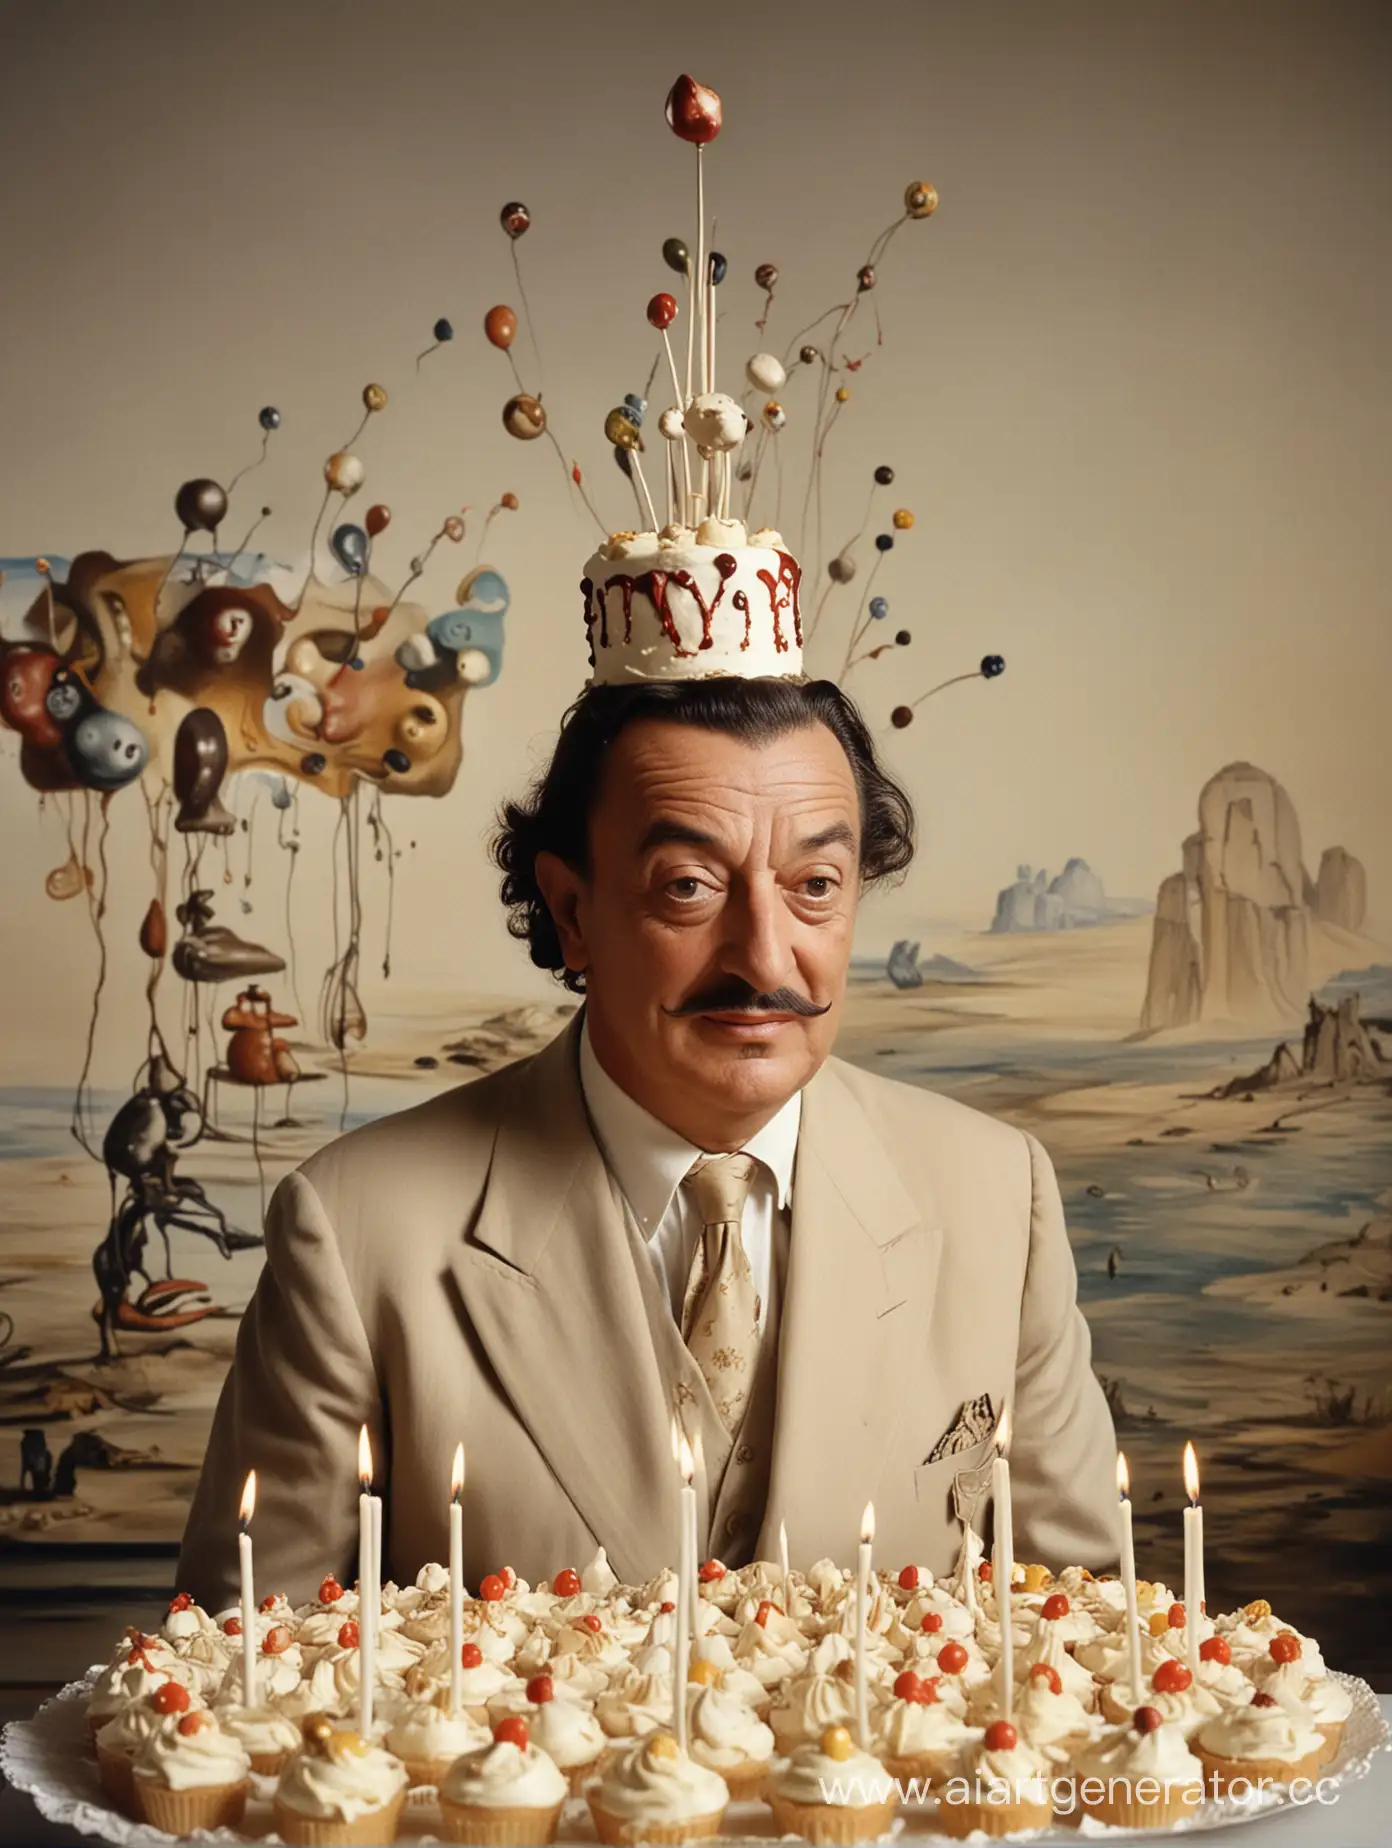 Salvador-Dali-with-Cap-and-Birthday-Cake-Surrounded-by-Paintings